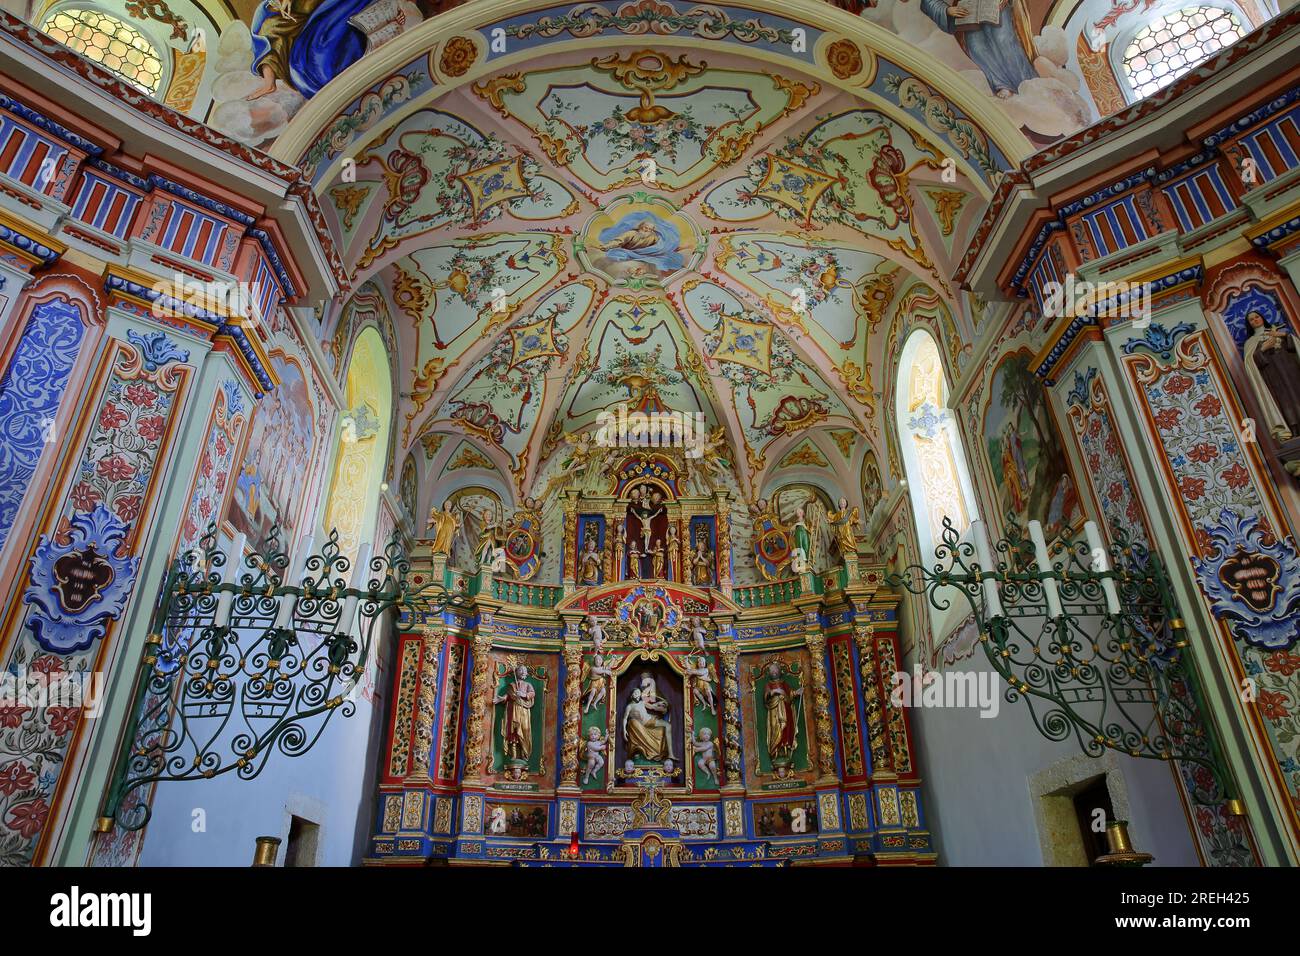 PEISEY NANCROIX, NORTHERN ALPS, FRANCE - JUNE 6, 2023: The colorful and baroque style interior of Notre Dame des Vernettes sanctuary Stock Photo